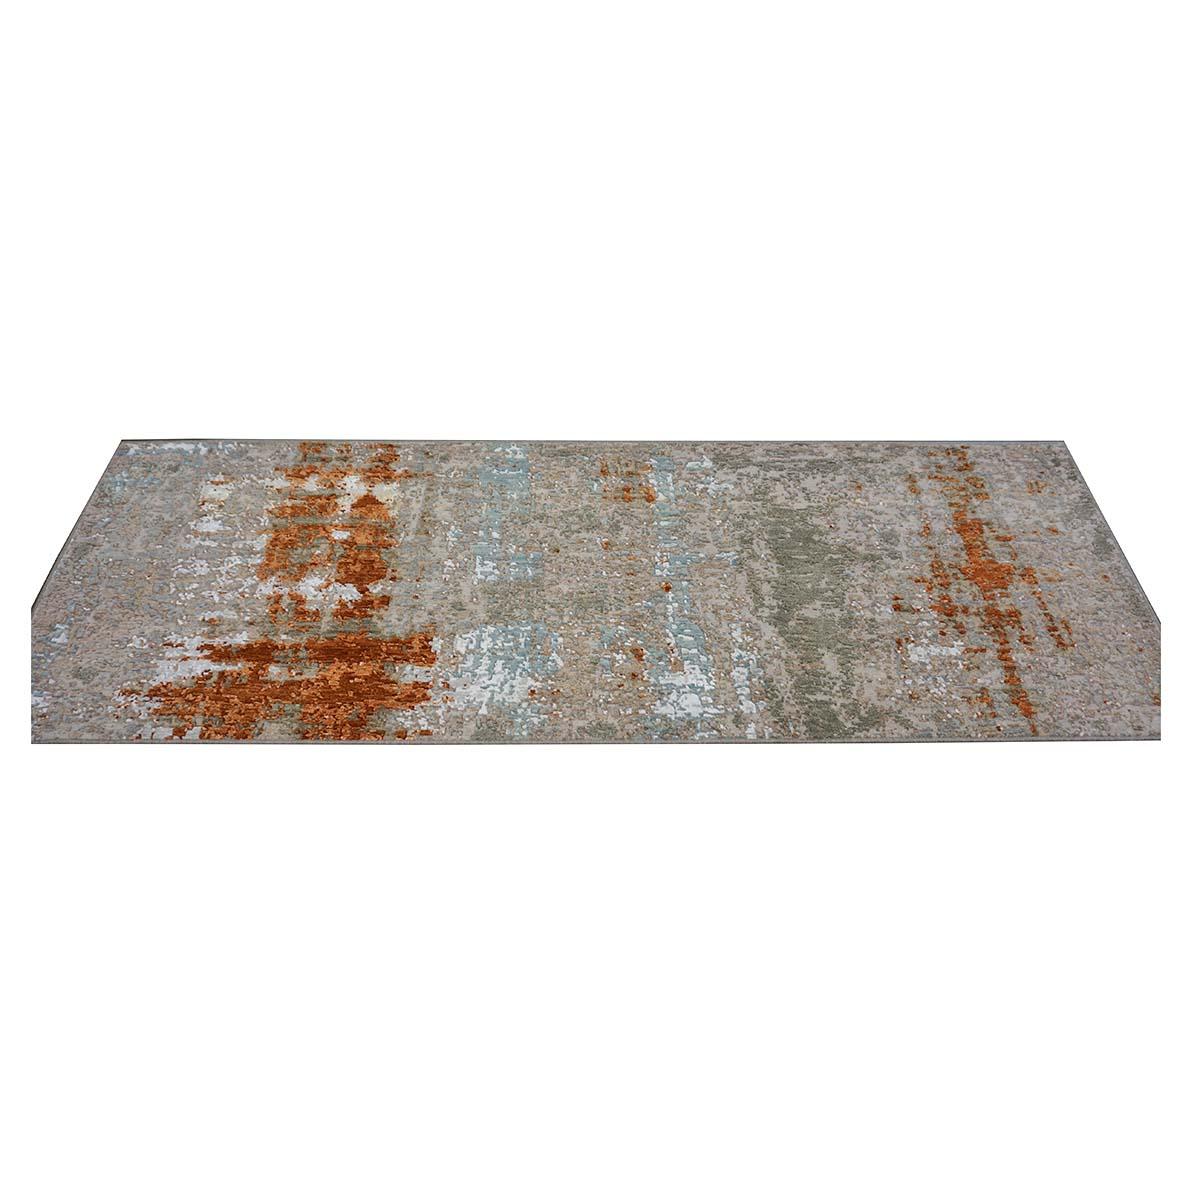 Contemporary 21st Century Indian Modern Wool & Silk 3X9 Grey, Rust, & Blue Runner Area Rug For Sale